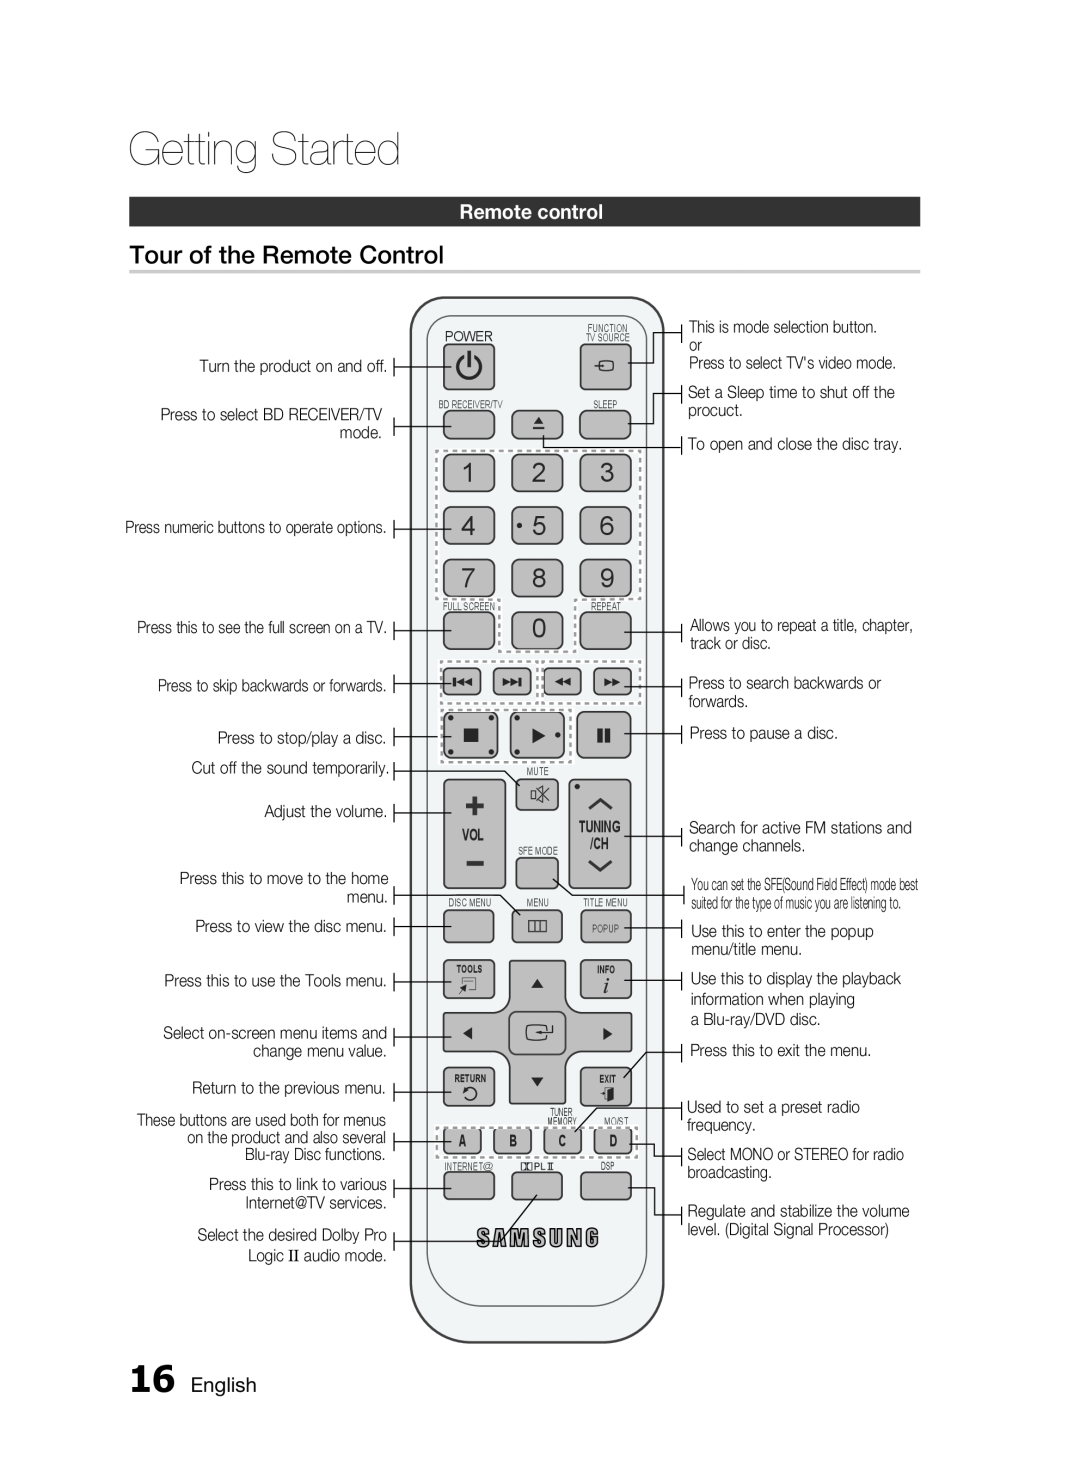 Samsung AH68-02290S, HT-C6730W user manual Tour of the Remote Control, Remote control, Getting Started 